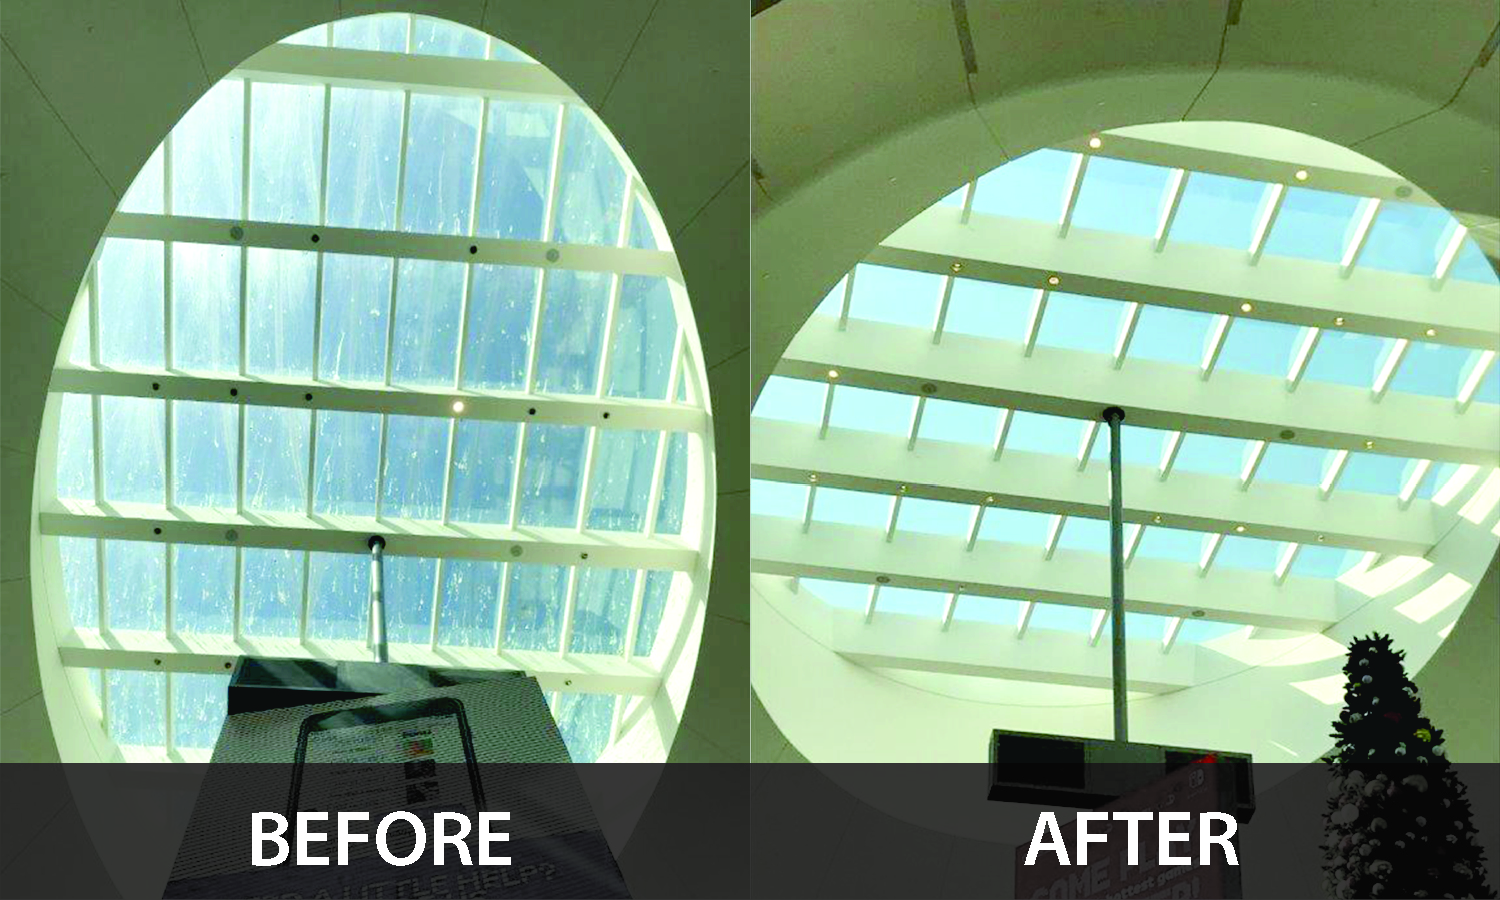 Before and After Photos of Mall Skylights